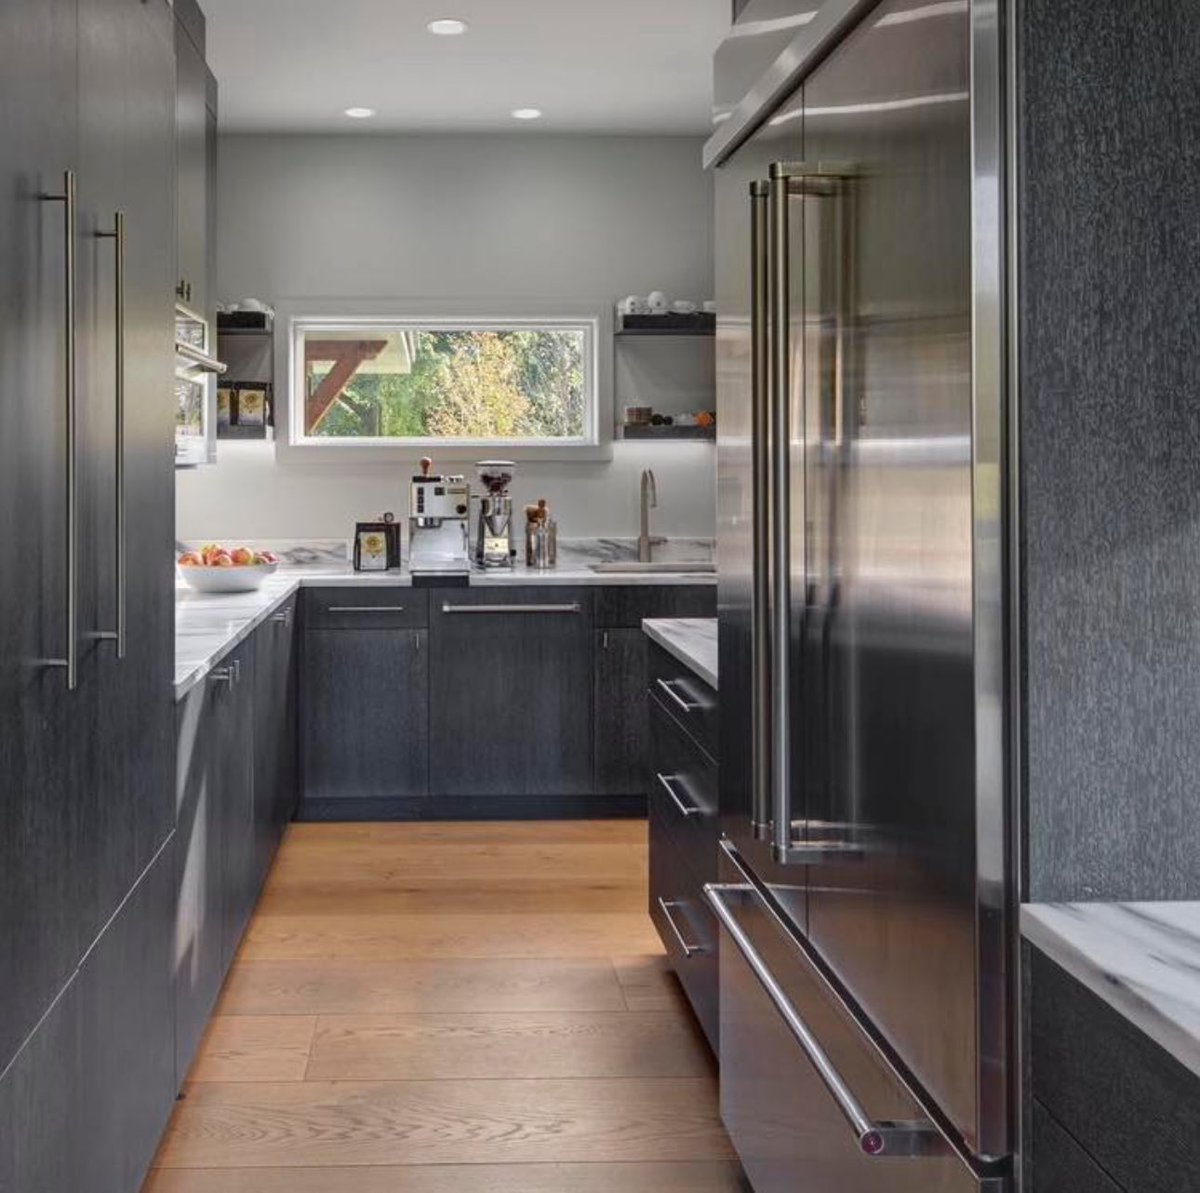 Check out our modern Butler's pantry, where functionality meets welcoming vibes to elevate the homeowner’s hosting game. jpcraighomebuilders.com 🍽️✨ #PantryPerfection #ModernHome #HomeStyle #Kitchen #LuxuryKitchen #ContemporaryLiving #CustomHome #OaklandCounty #JPCraig